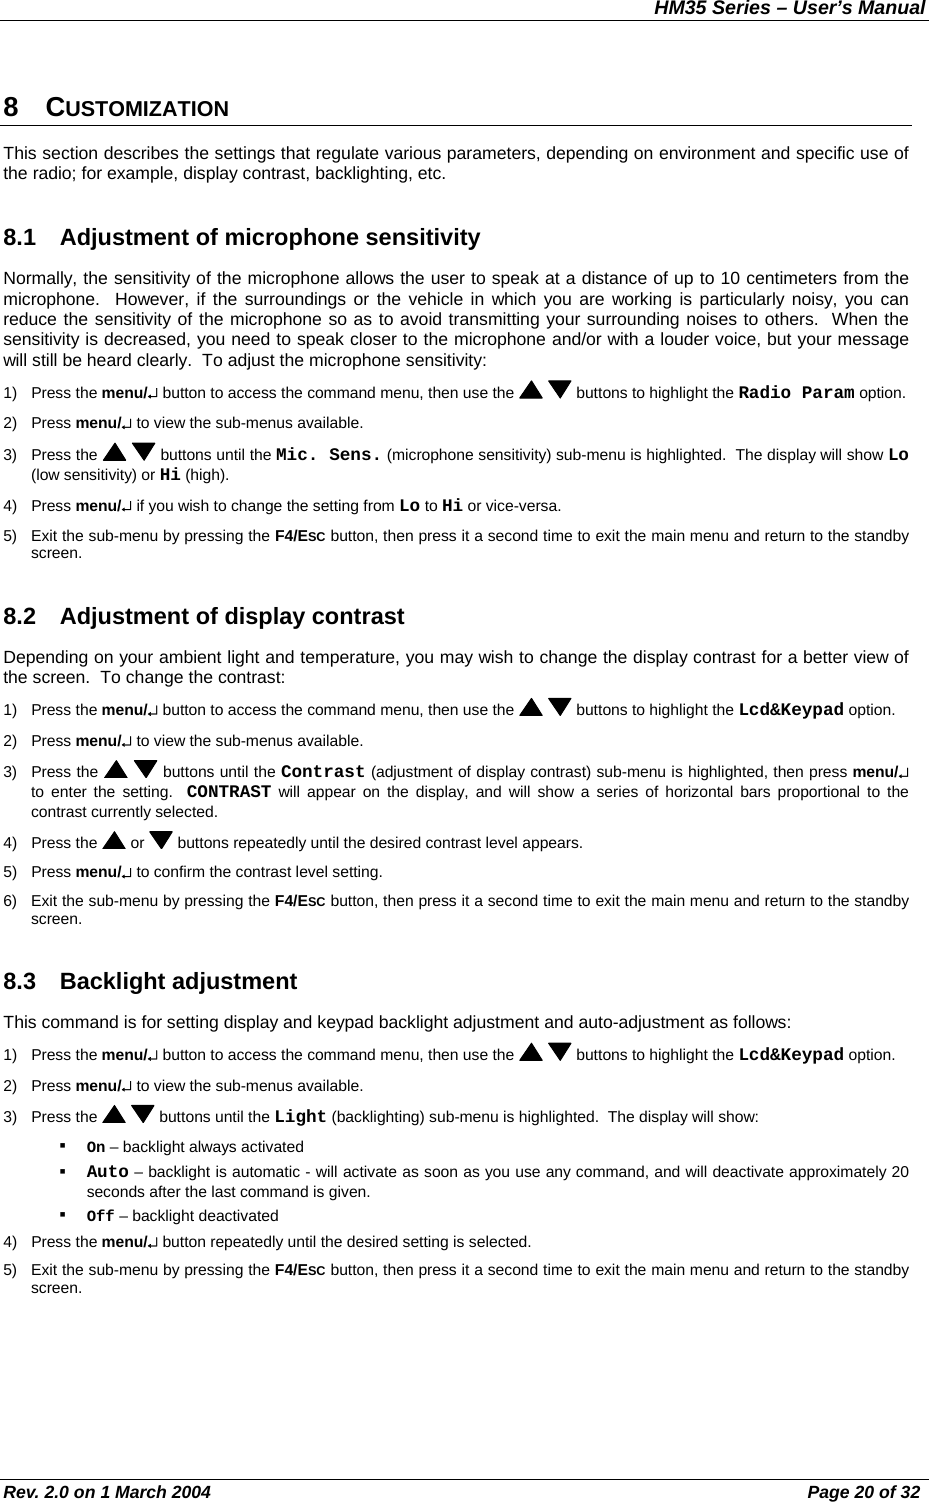 HM35 Series – User’s Manual Rev. 2.0 on 1 March 2004  Page 20 of 32 8 CUSTOMIZATION This section describes the settings that regulate various parameters, depending on environment and specific use of the radio; for example, display contrast, backlighting, etc. 8.1  Adjustment of microphone sensitivity Normally, the sensitivity of the microphone allows the user to speak at a distance of up to 10 centimeters from the microphone.  However, if the surroundings or the vehicle in which you are working is particularly noisy, you can reduce the sensitivity of the microphone so as to avoid transmitting your surrounding noises to others.  When the sensitivity is decreased, you need to speak closer to the microphone and/or with a louder voice, but your message will still be heard clearly.  To adjust the microphone sensitivity: 1) Press the menu/↵ button to access the command menu, then use the    buttons to highlight the Radio Param option. 2) Press menu/↵ to view the sub-menus available. 3) Press the    buttons until the Mic. Sens. (microphone sensitivity) sub-menu is highlighted.  The display will show Lo (low sensitivity) or Hi (high). 4) Press menu/↵ if you wish to change the setting from Lo to Hi or vice-versa. 5)  Exit the sub-menu by pressing the F4/ESC button, then press it a second time to exit the main menu and return to the standby screen. 8.2  Adjustment of display contrast Depending on your ambient light and temperature, you may wish to change the display contrast for a better view of the screen.  To change the contrast: 1) Press the menu/↵ button to access the command menu, then use the    buttons to highlight the Lcd&amp;Keypad option. 2) Press menu/↵ to view the sub-menus available. 3) Press the    buttons until the Contrast (adjustment of display contrast) sub-menu is highlighted, then press menu/↵ to enter the setting.  CONTRAST will appear on the display, and will show a series of horizontal bars proportional to the contrast currently selected. 4) Press the   or   buttons repeatedly until the desired contrast level appears. 5) Press menu/↵ to confirm the contrast level setting. 6)  Exit the sub-menu by pressing the F4/ESC button, then press it a second time to exit the main menu and return to the standby screen. 8.3 Backlight adjustment This command is for setting display and keypad backlight adjustment and auto-adjustment as follows: 1) Press the menu/↵ button to access the command menu, then use the    buttons to highlight the Lcd&amp;Keypad option. 2) Press menu/↵ to view the sub-menus available. 3) Press the    buttons until the Light (backlighting) sub-menu is highlighted.  The display will show:   On – backlight always activated    Auto – backlight is automatic - will activate as soon as you use any command, and will deactivate approximately 20 seconds after the last command is given.   Off – backlight deactivated 4) Press the menu/↵ button repeatedly until the desired setting is selected. 5)  Exit the sub-menu by pressing the F4/ESC button, then press it a second time to exit the main menu and return to the standby screen. 